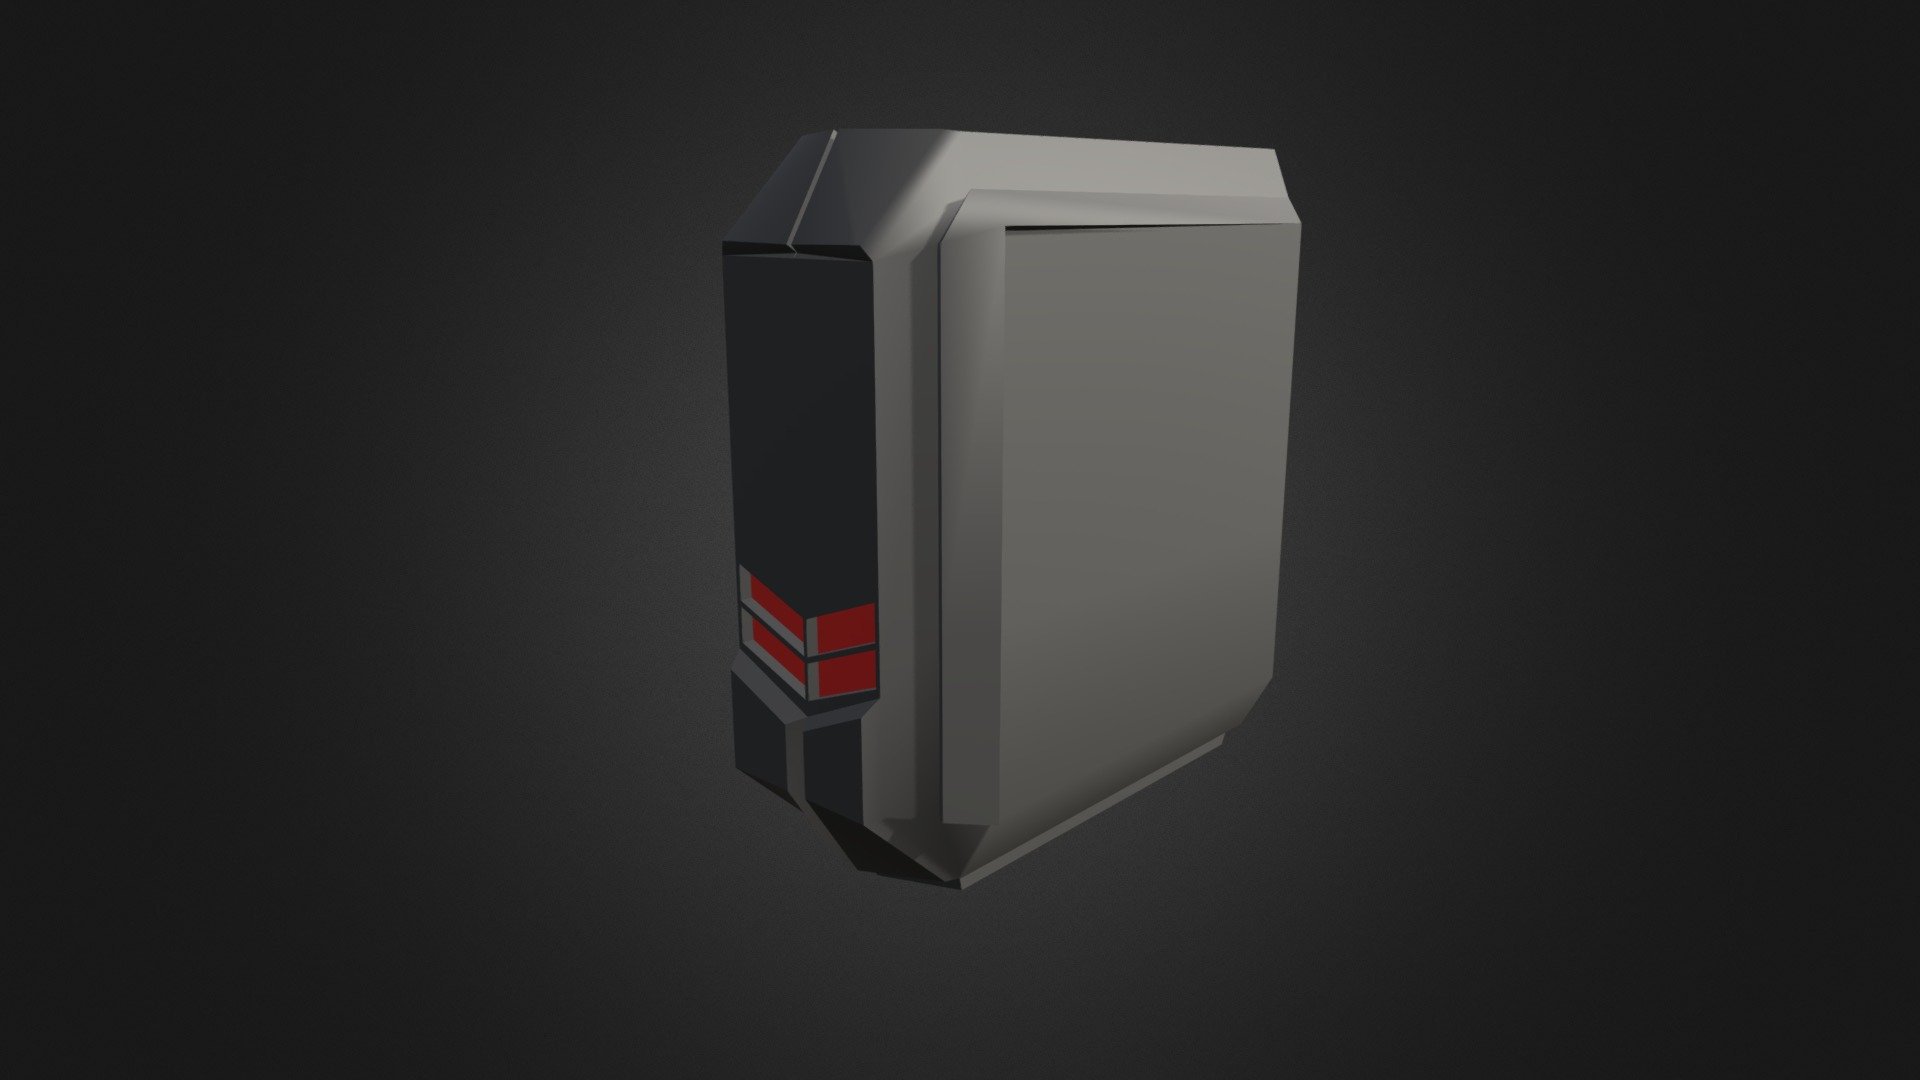 Here’s my daily entry for the Household Props Challenge: a computer case, based on the OMEN line of desktop cases. For every true hardcore gamer and high-specs developer 3d model